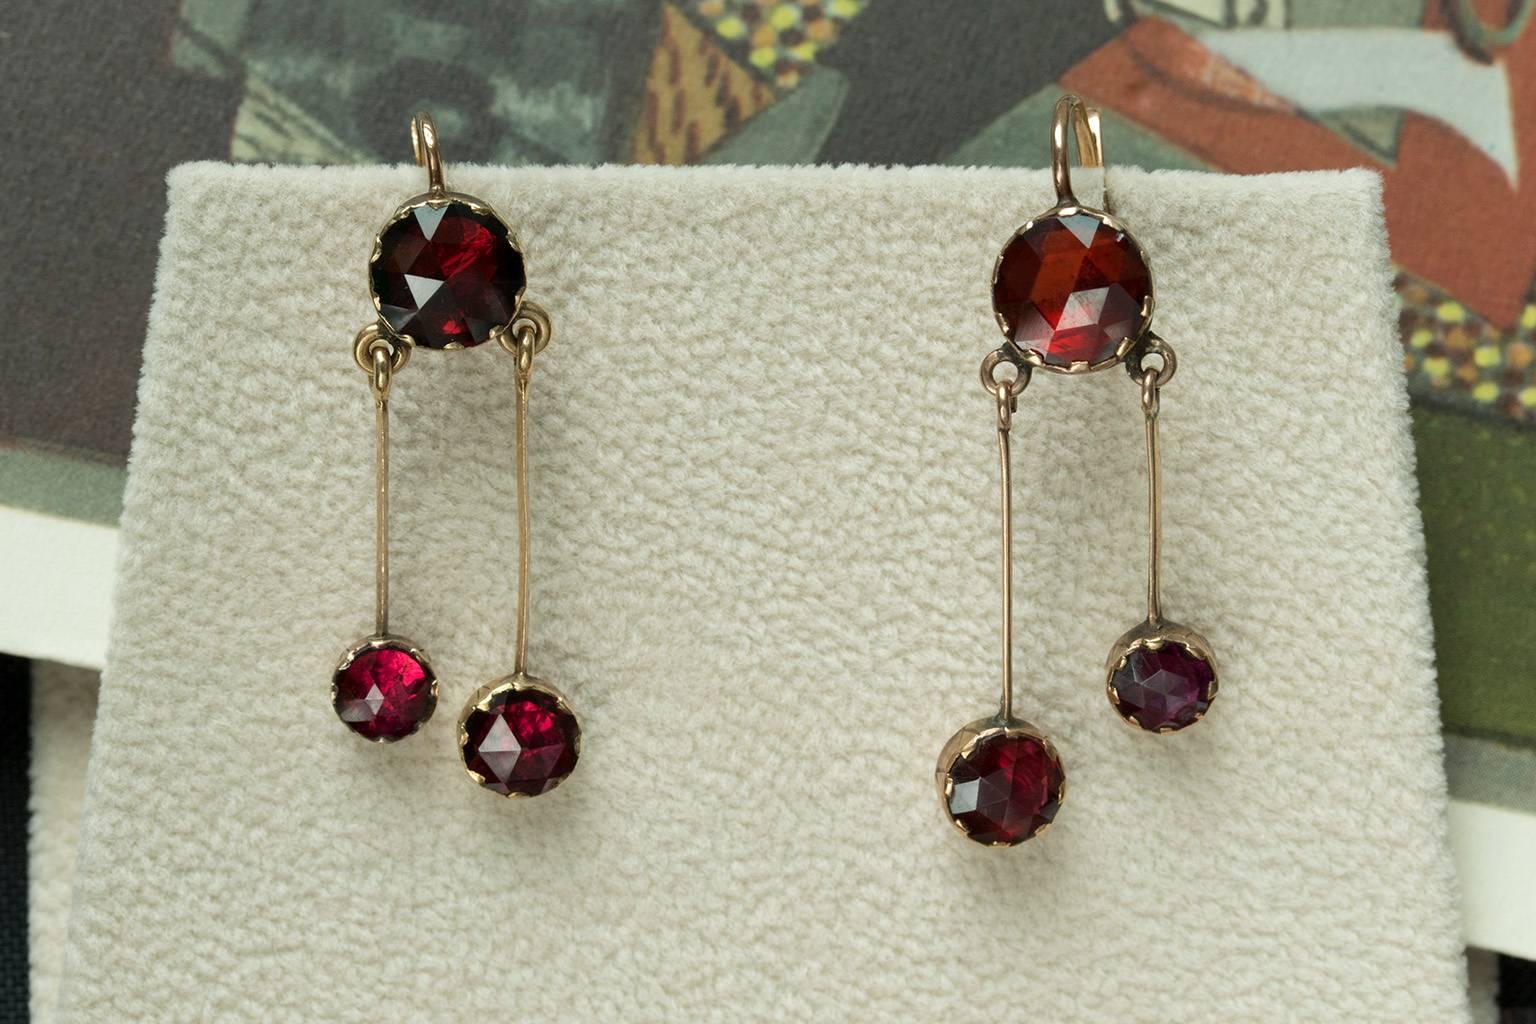 Late 19th century French Perpignan garnet earrings. The garnets are foil-backed, and the rose cut facets make them shimmer beautifully with light. The earrings are set in 18k gold. They are lightweight and easy to wear. Overall in very good